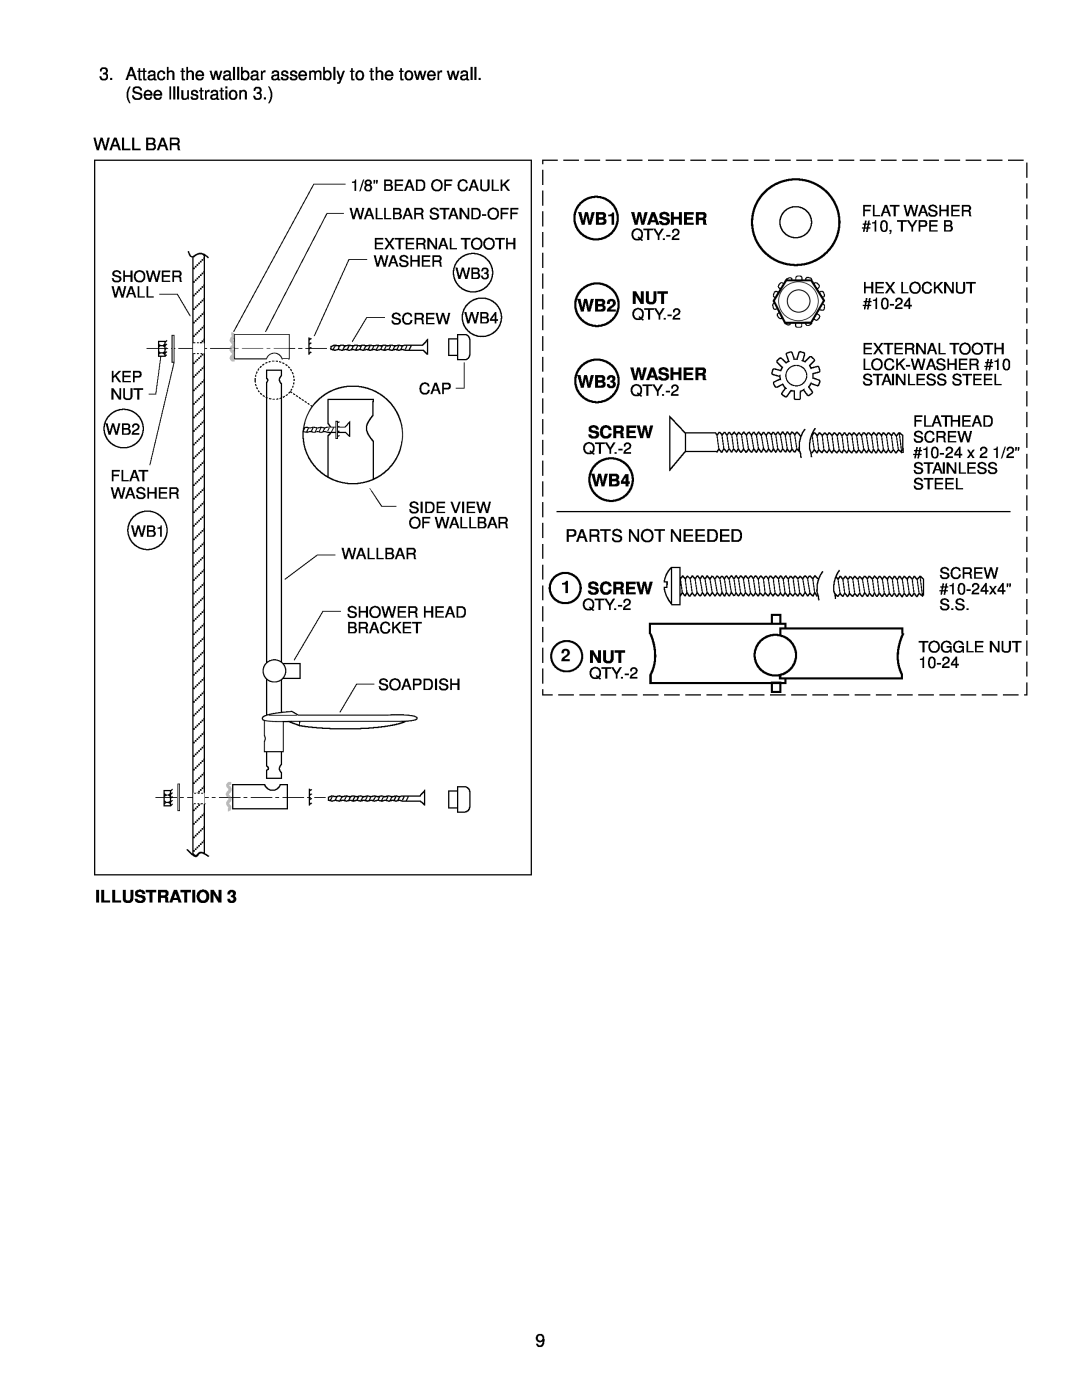 Jacuzzi J-SHOWER TOWERTM manual Attach the wallbar assembly to the tower wall. See Illustration, Wall Bar, Washer, Screw 